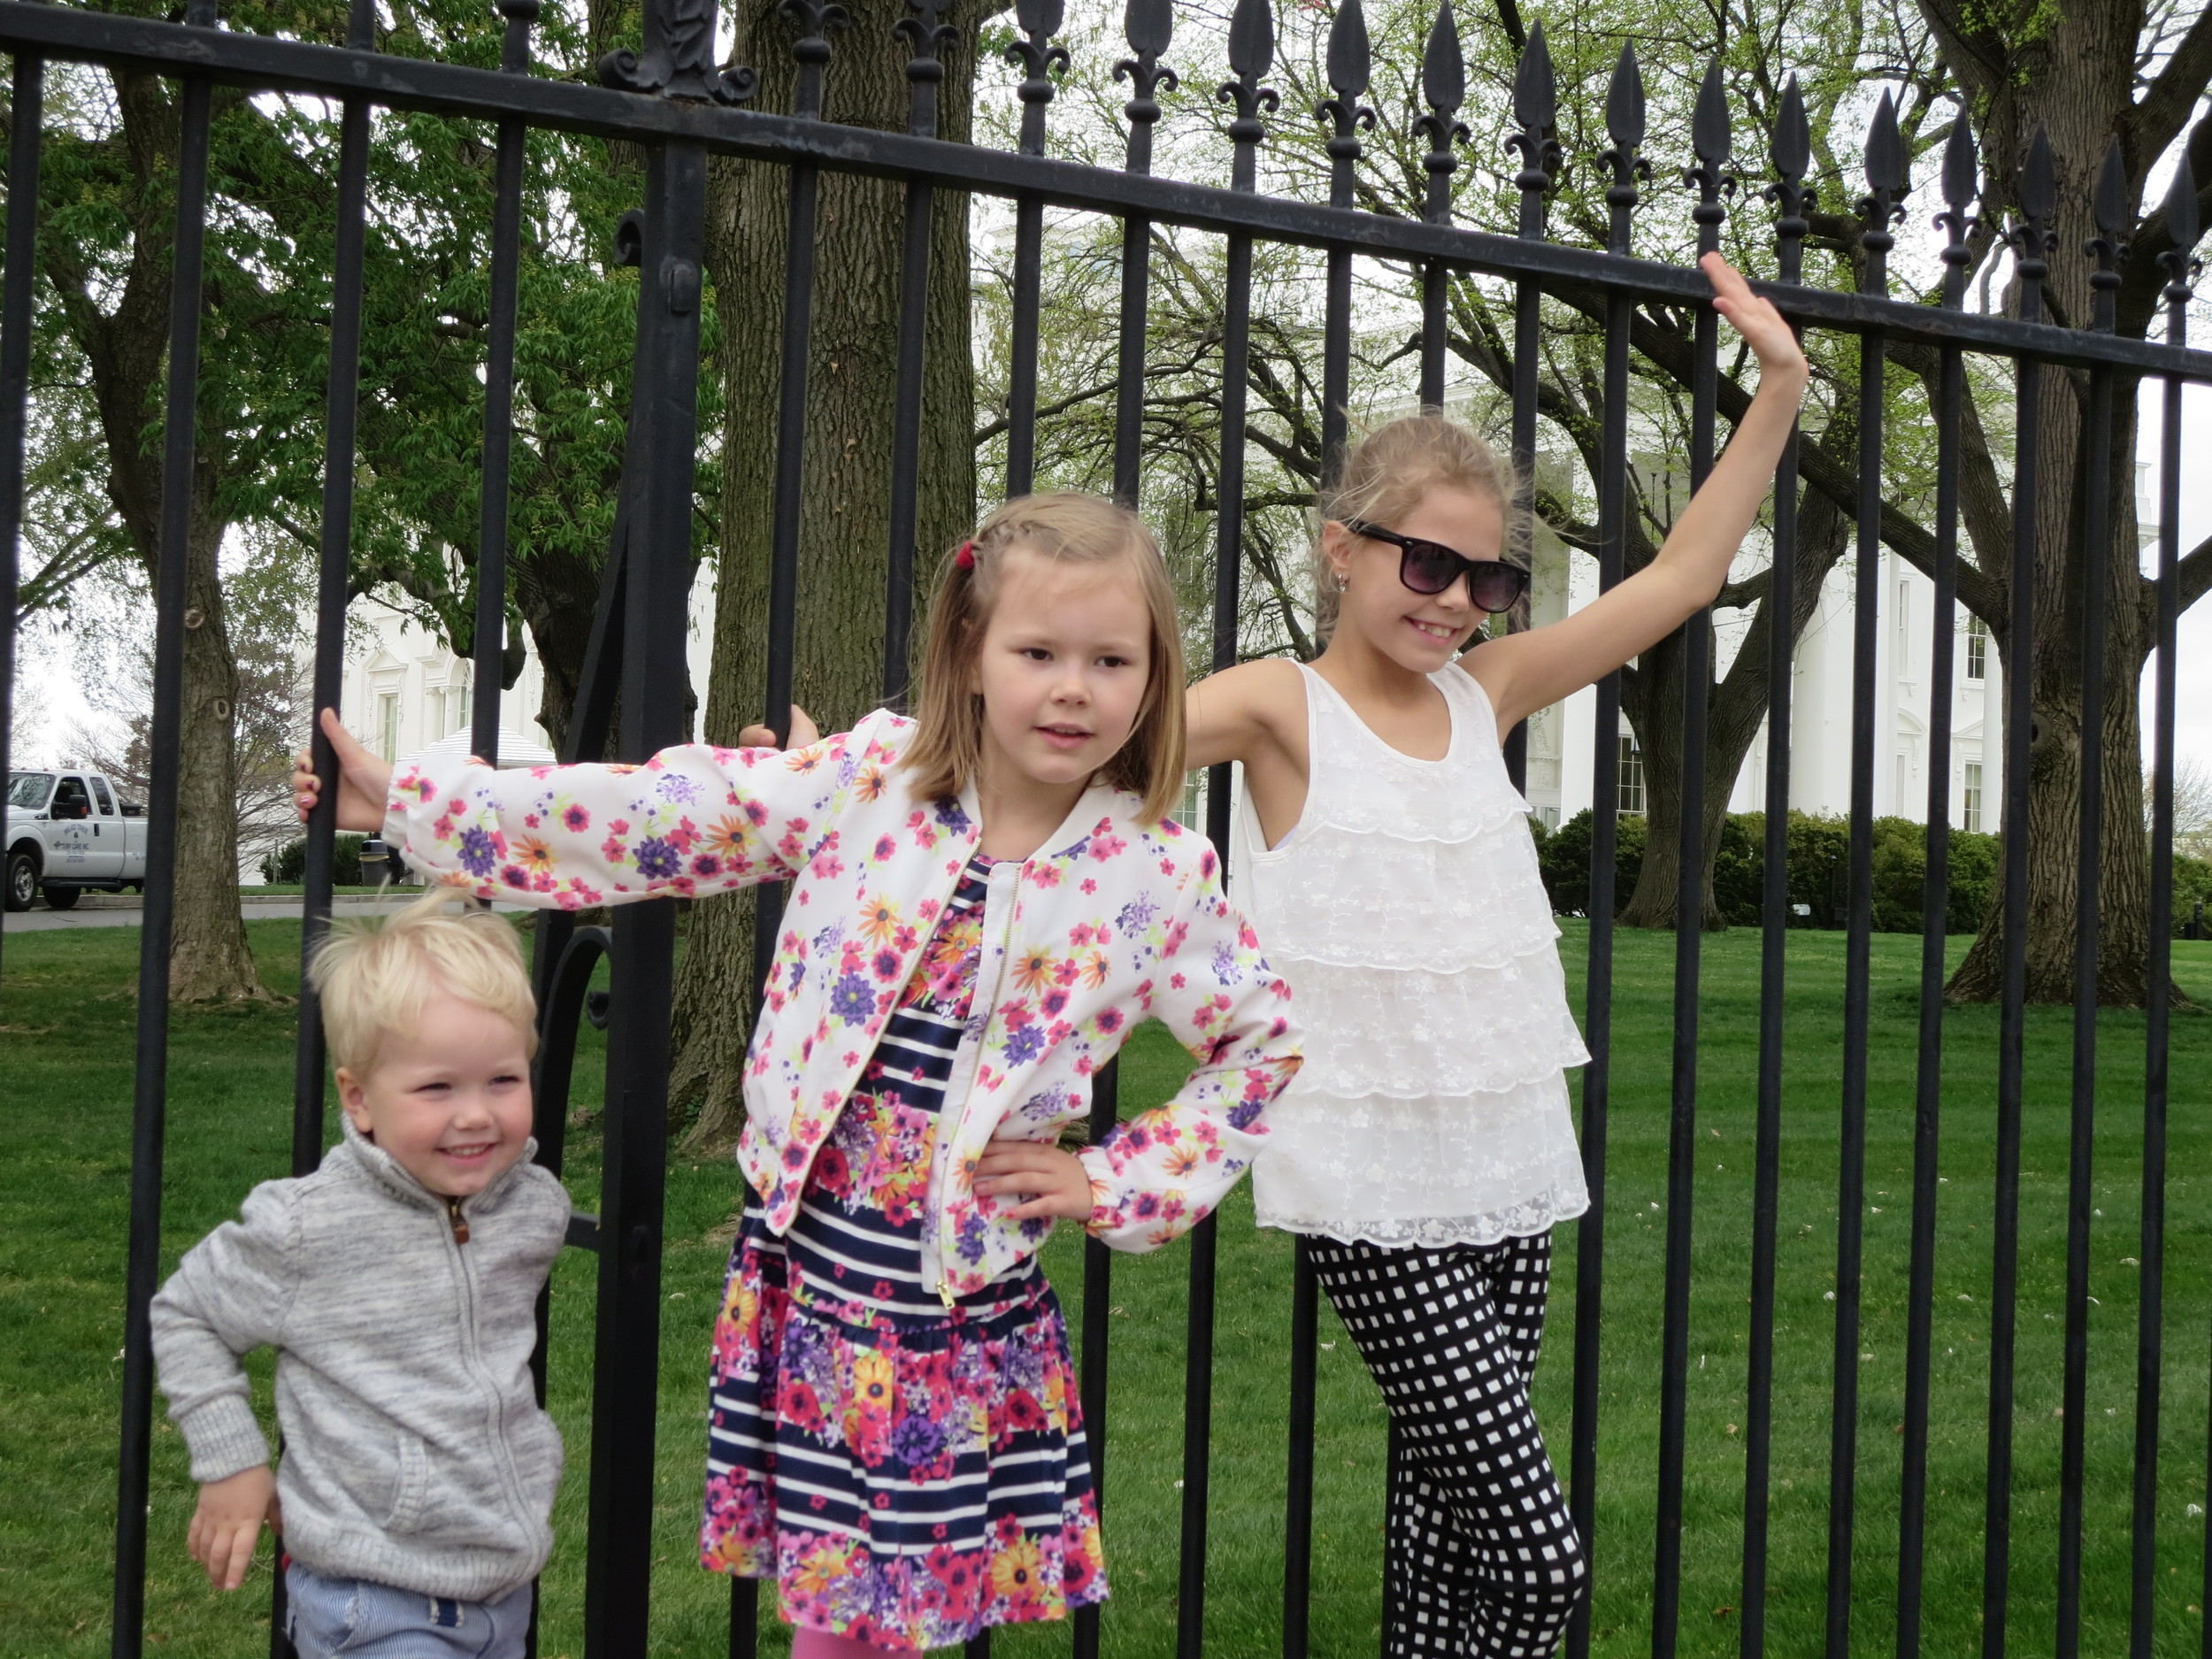 The "Providence kids" hanging on the fence of The White House